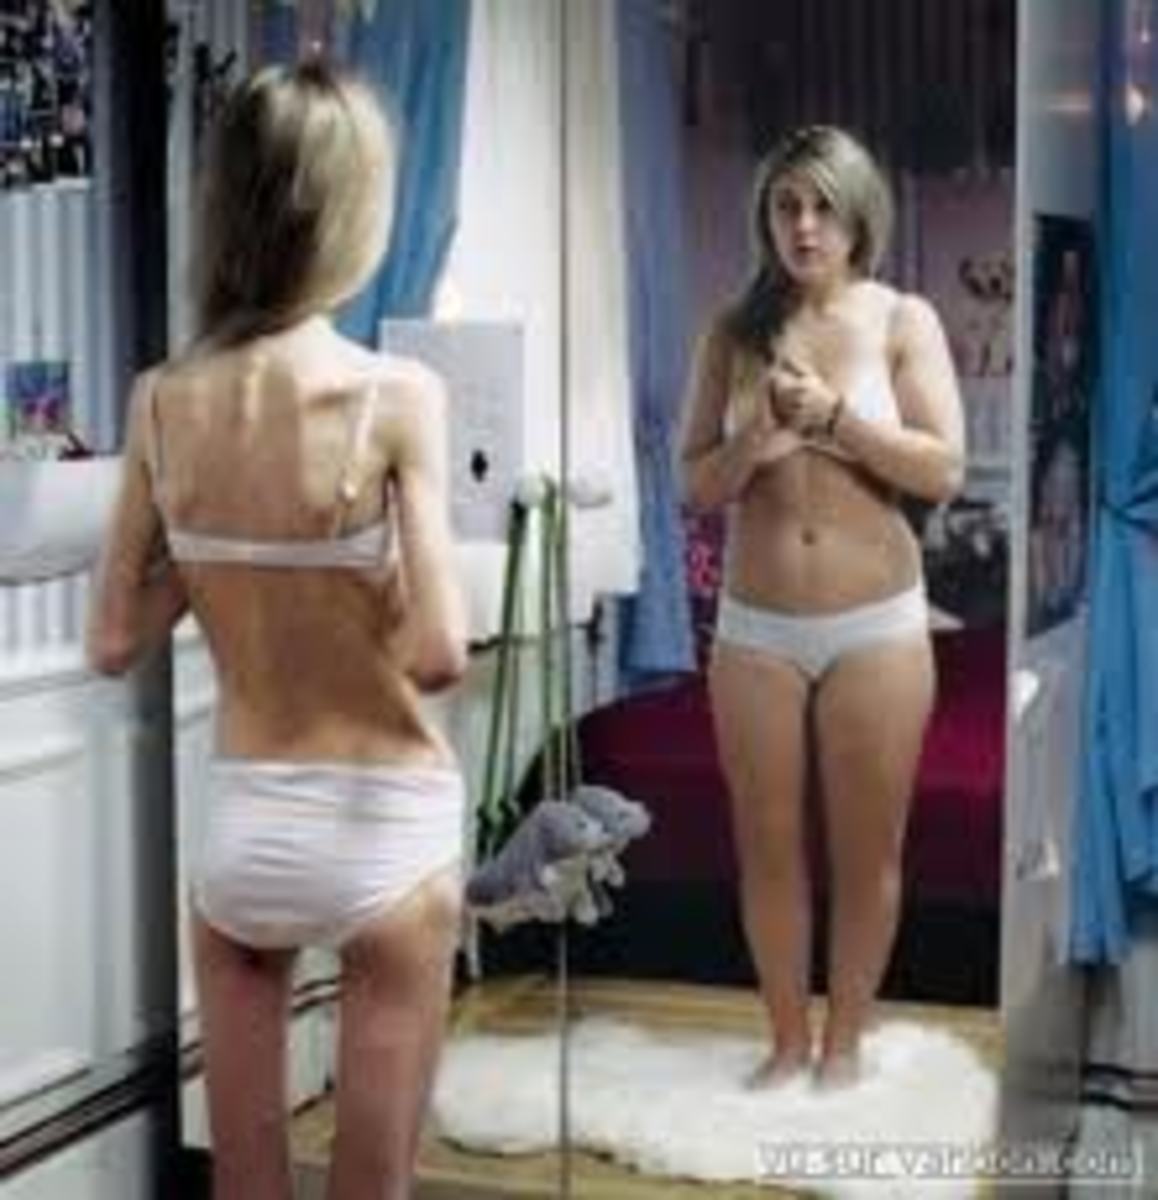 The Effect Media has on our Body Image